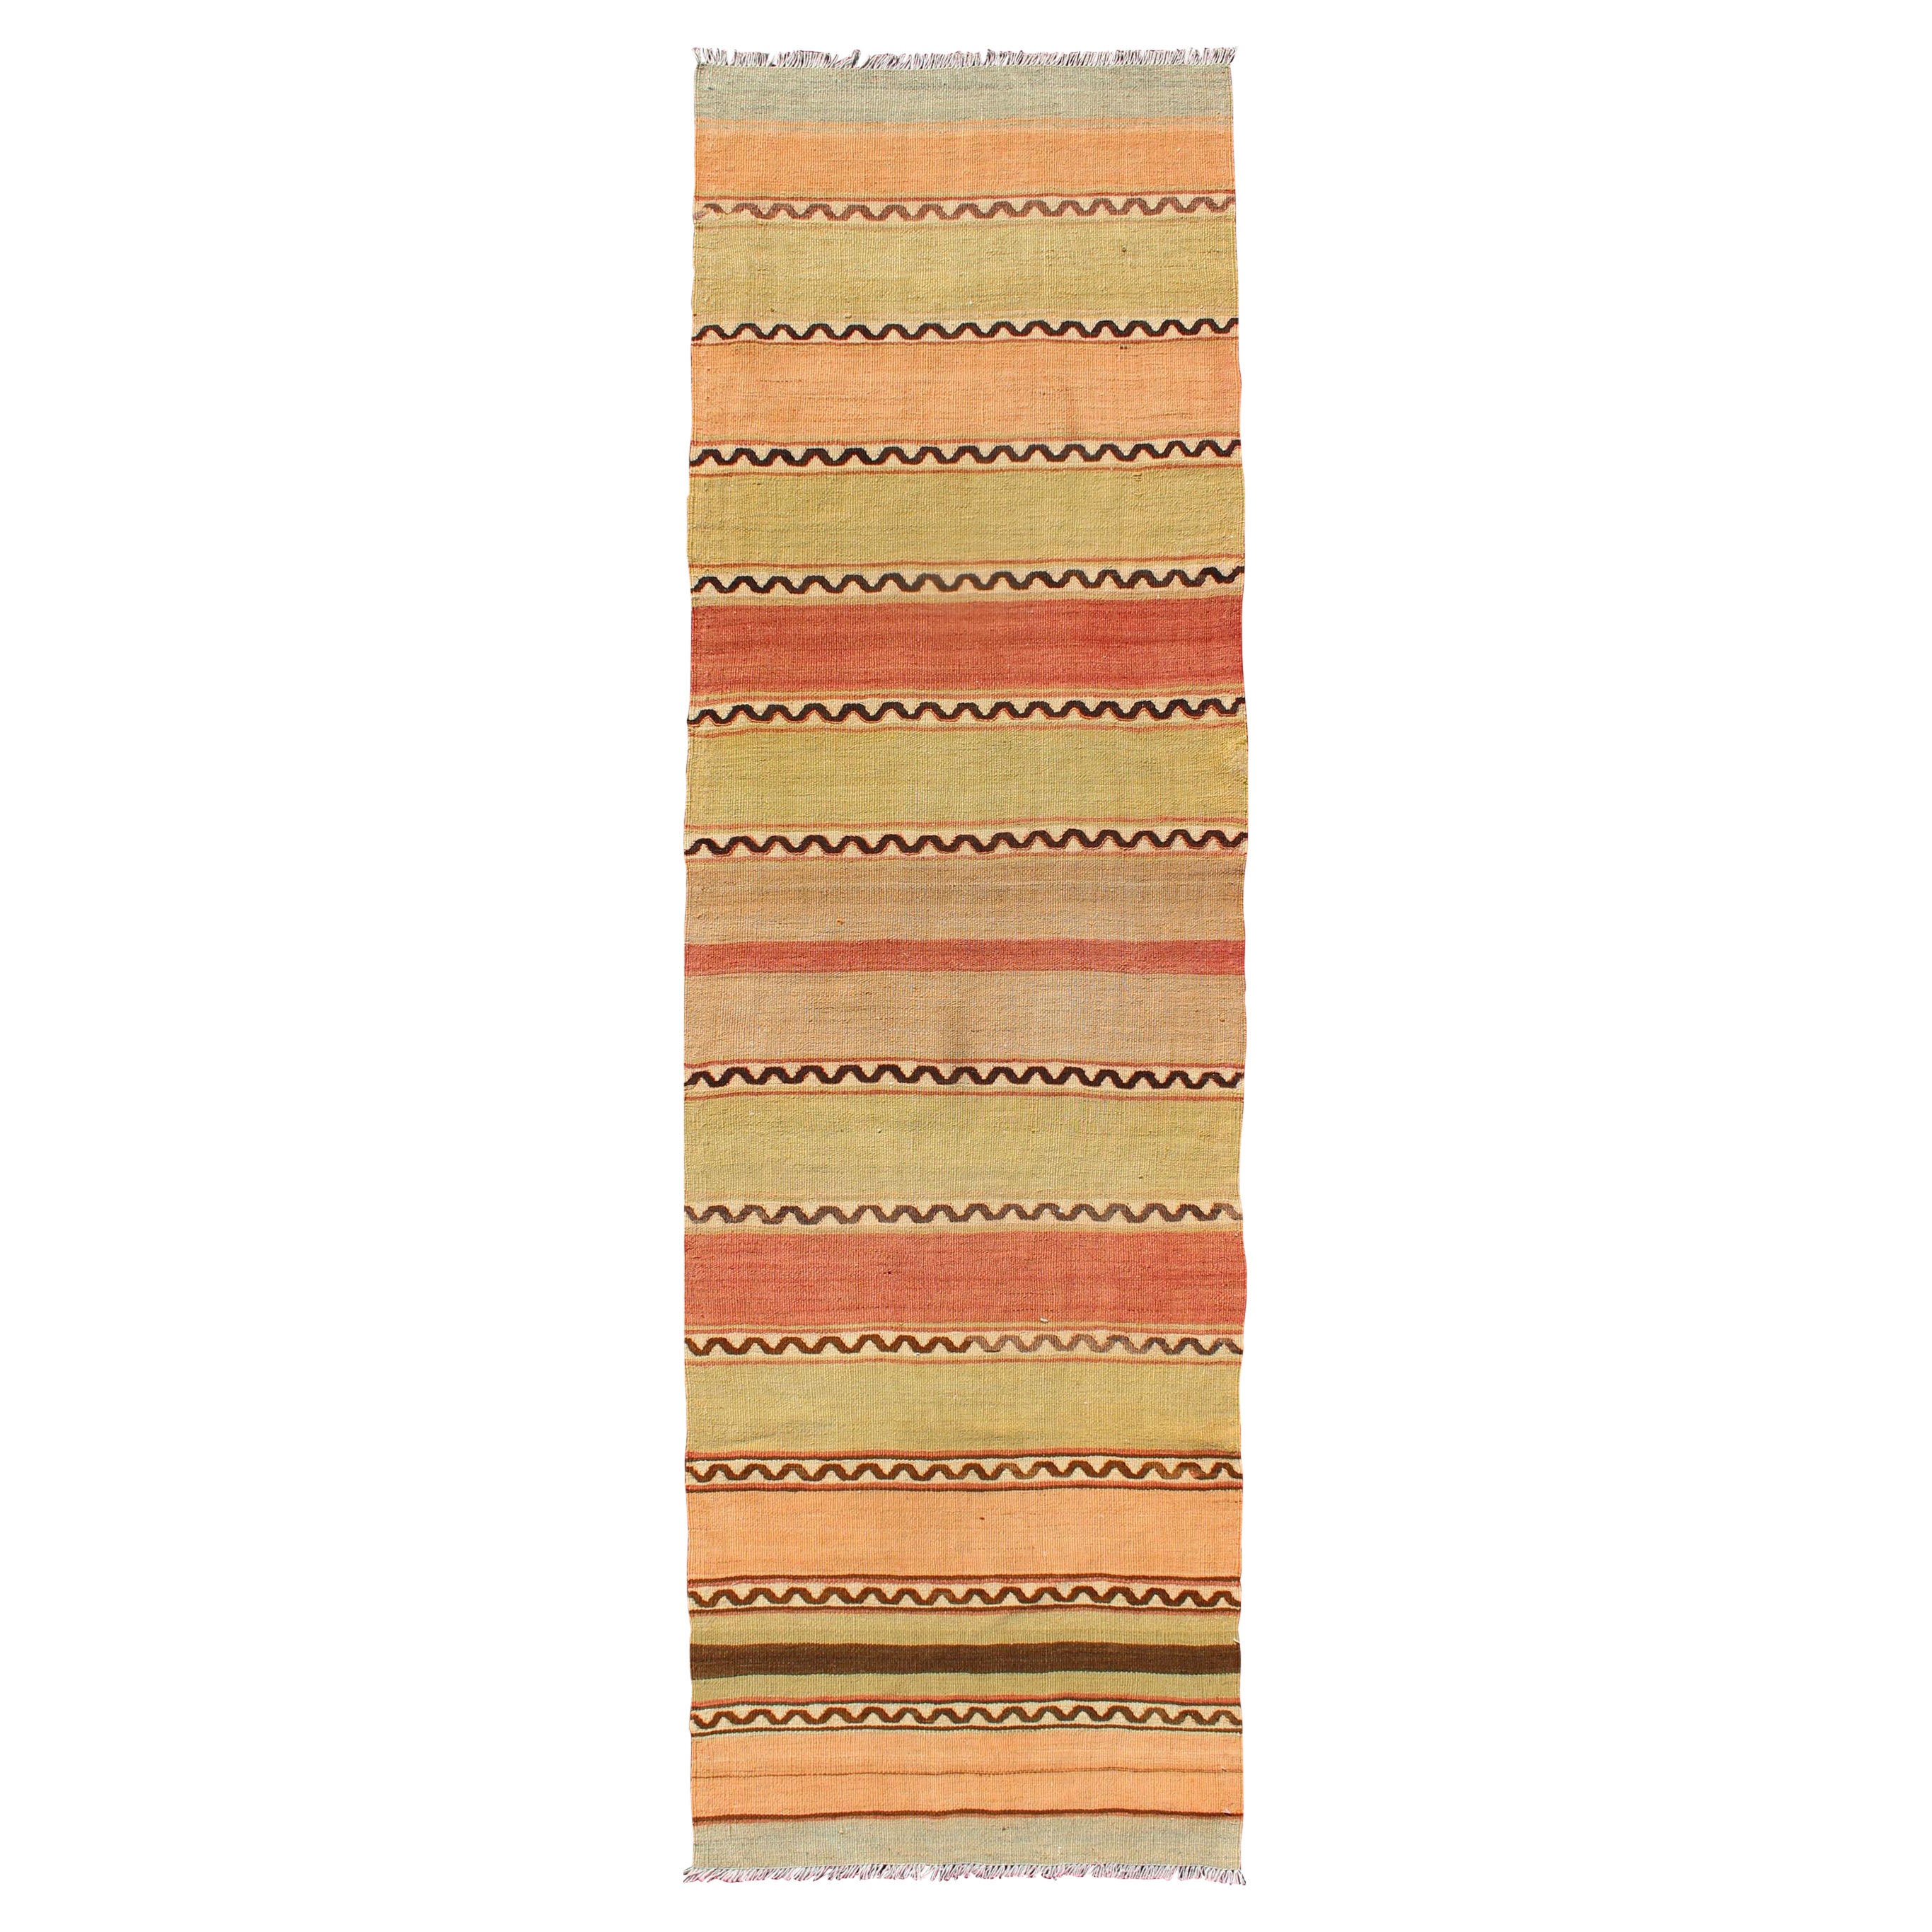 Vintage Turkish Kilim Runner with Stripes in Red, Green, Yellow, and Orange